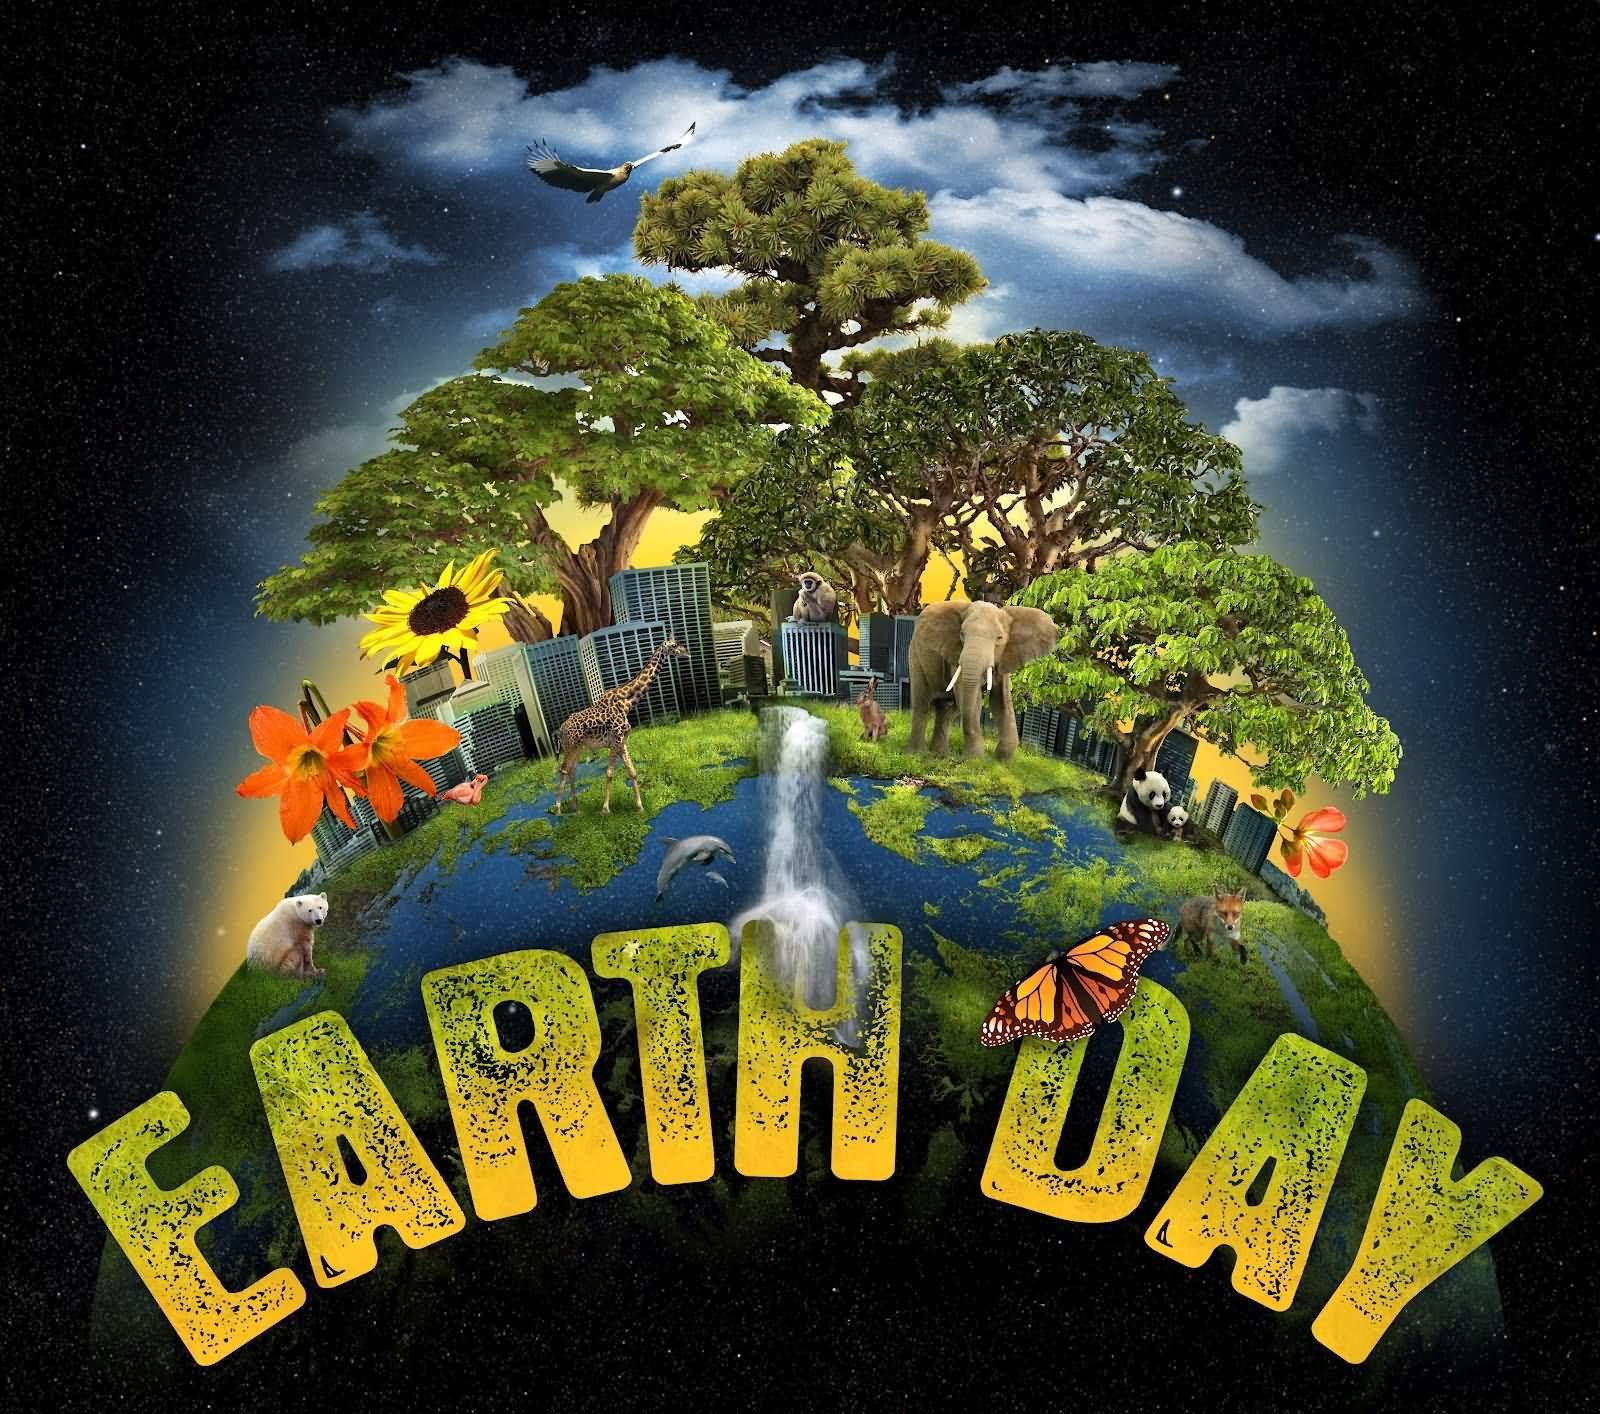 World Environment Day Best Animation Pics. Earth day posters, Earth day image, World earth day